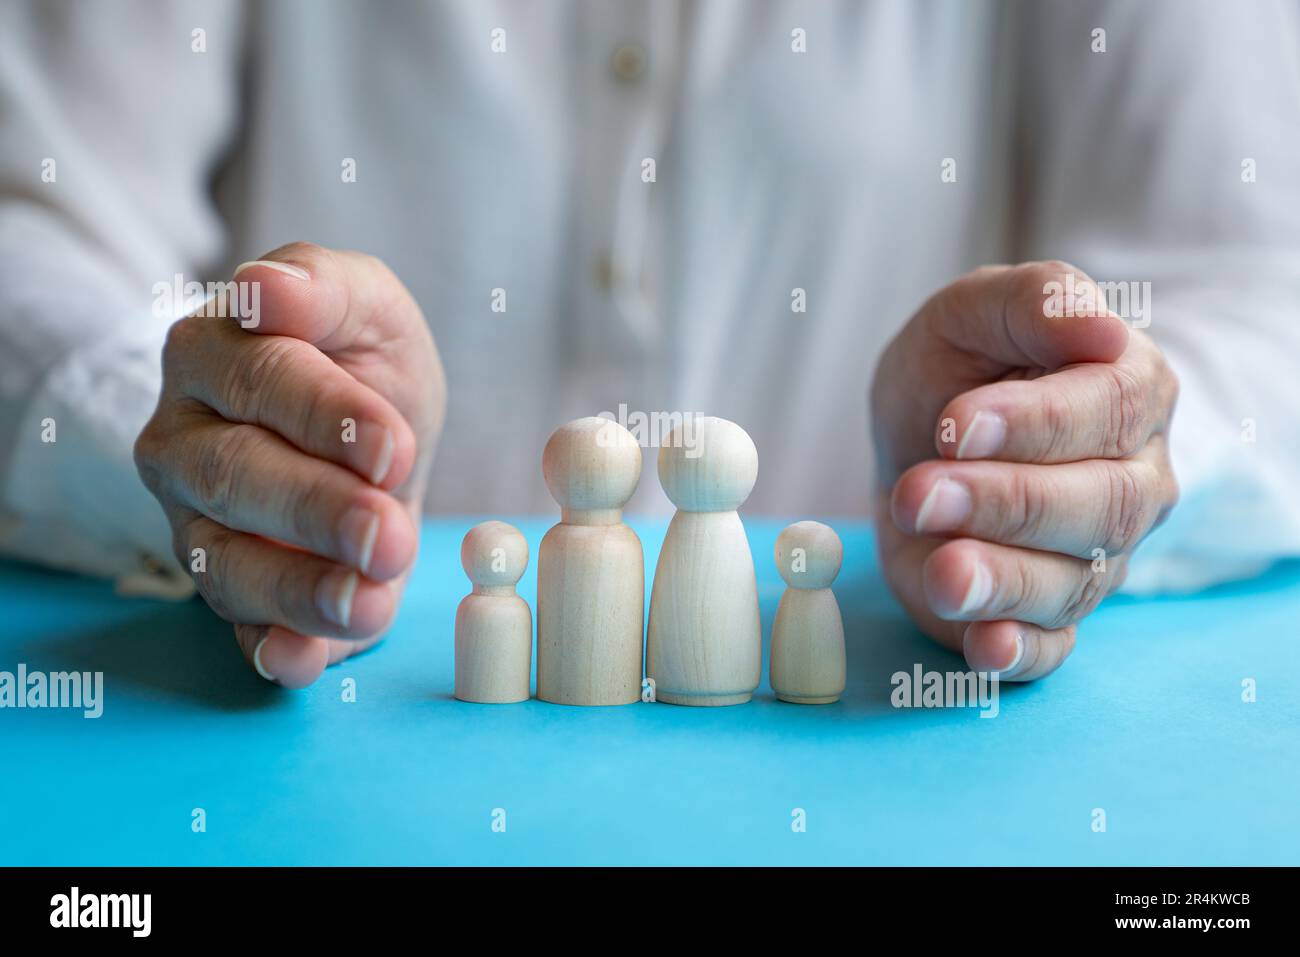 Woman's hands cover over wooden doll family with father, mother, daughter and son. Family care and protection concept. Stock Photo